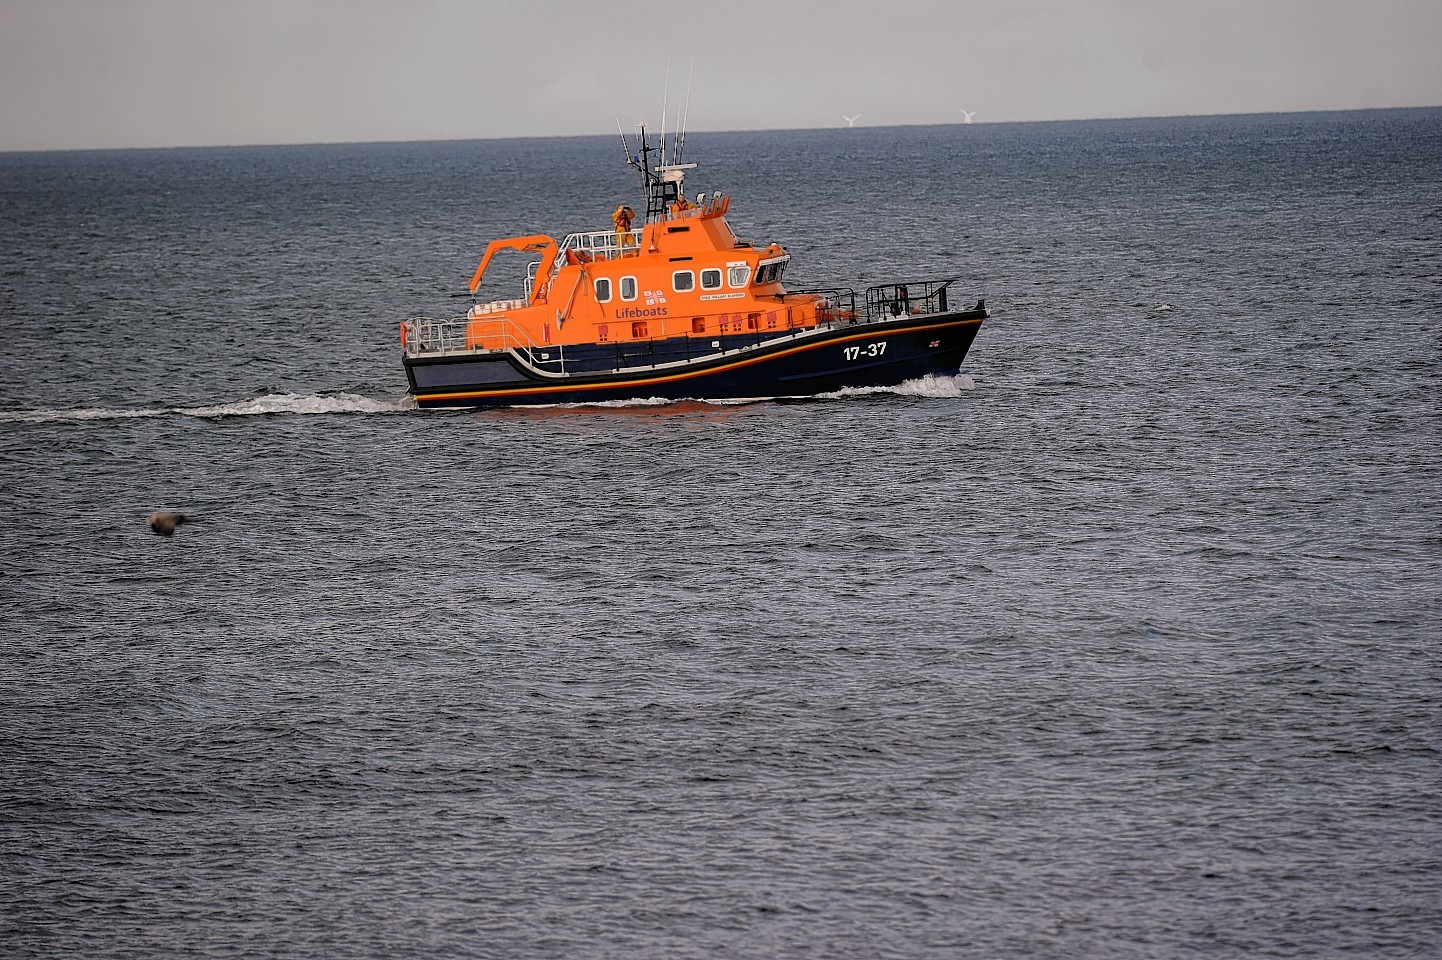 The Buckie Lifeboat was called out